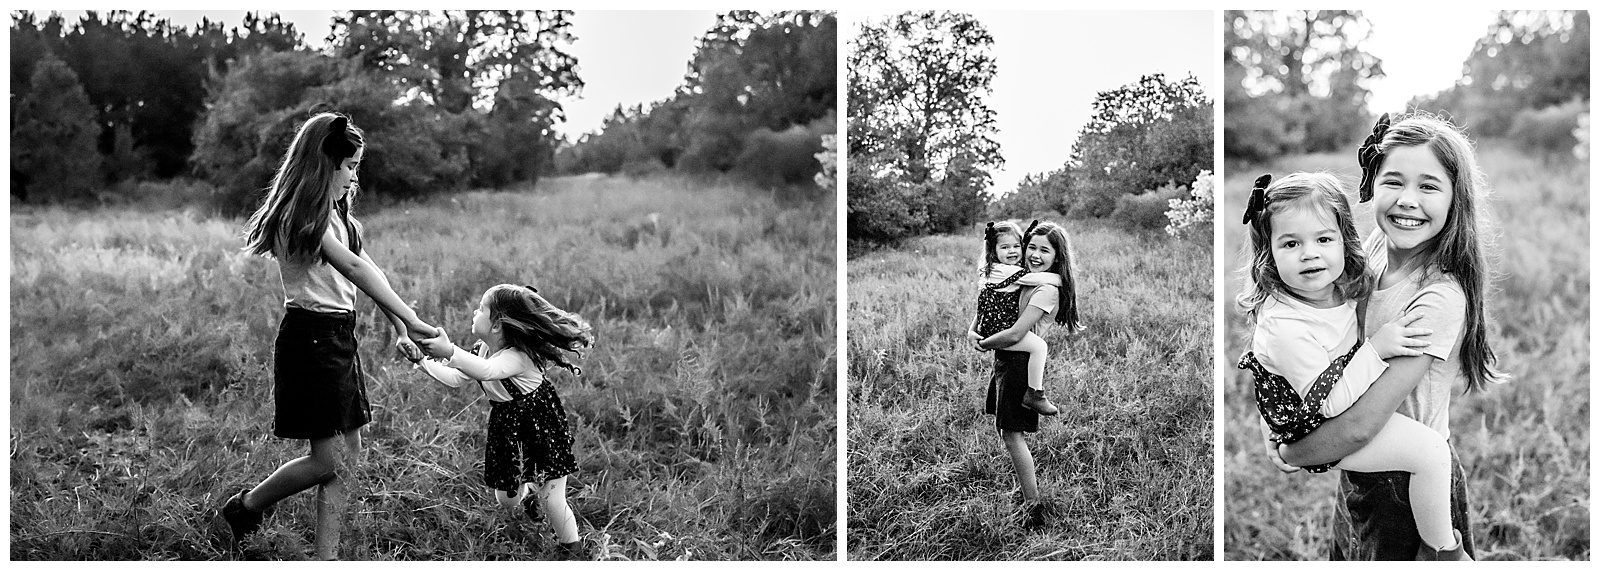 Playful photography in tall grass